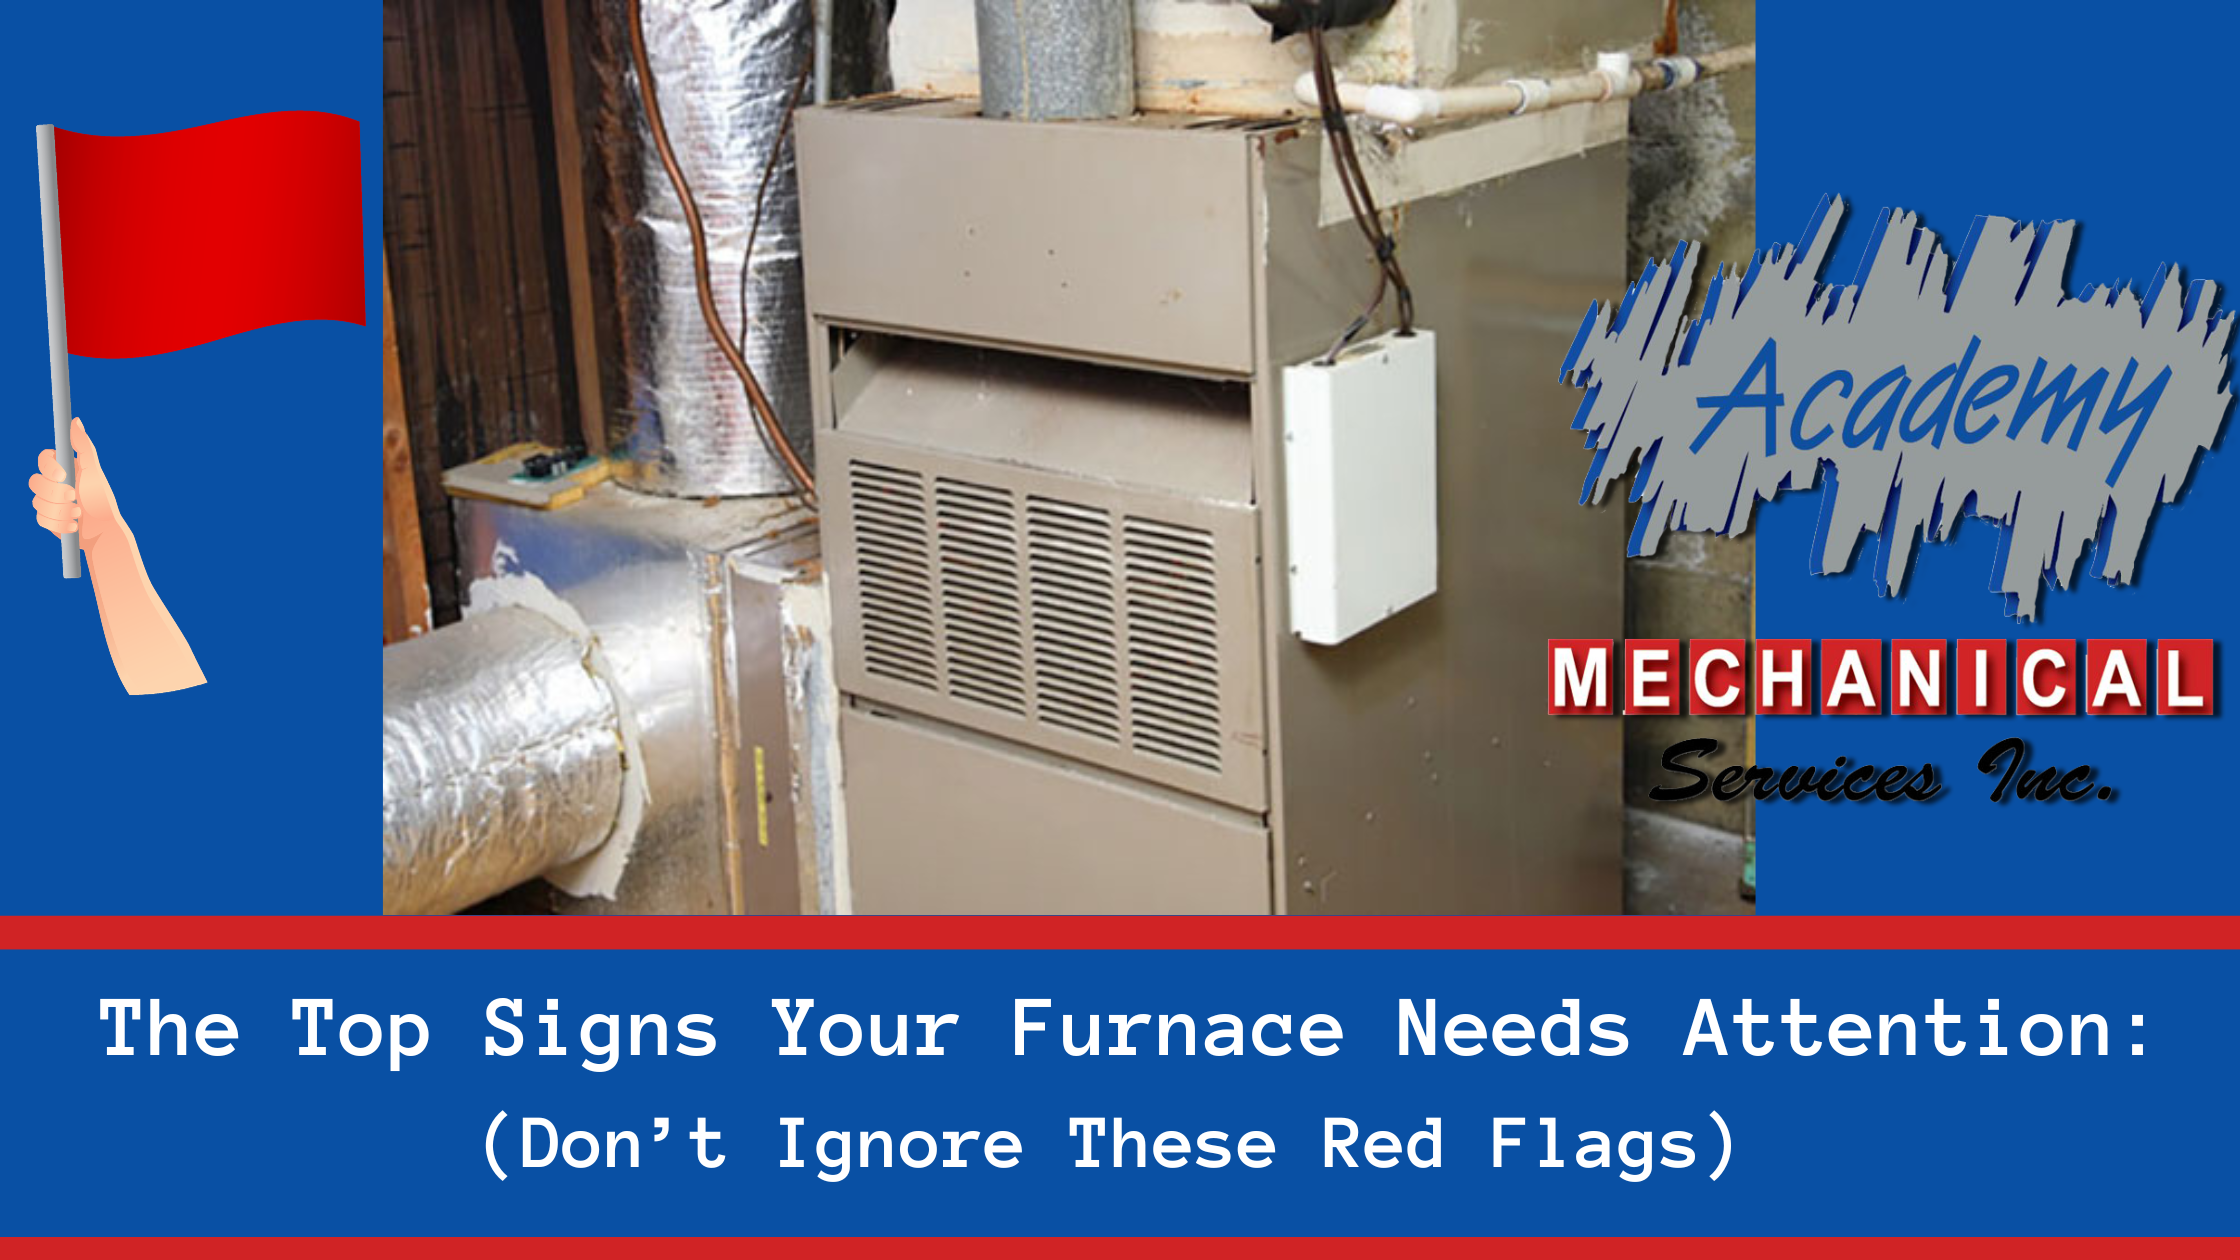 You are currently viewing The Top Signs Your Furnace Needs Attention